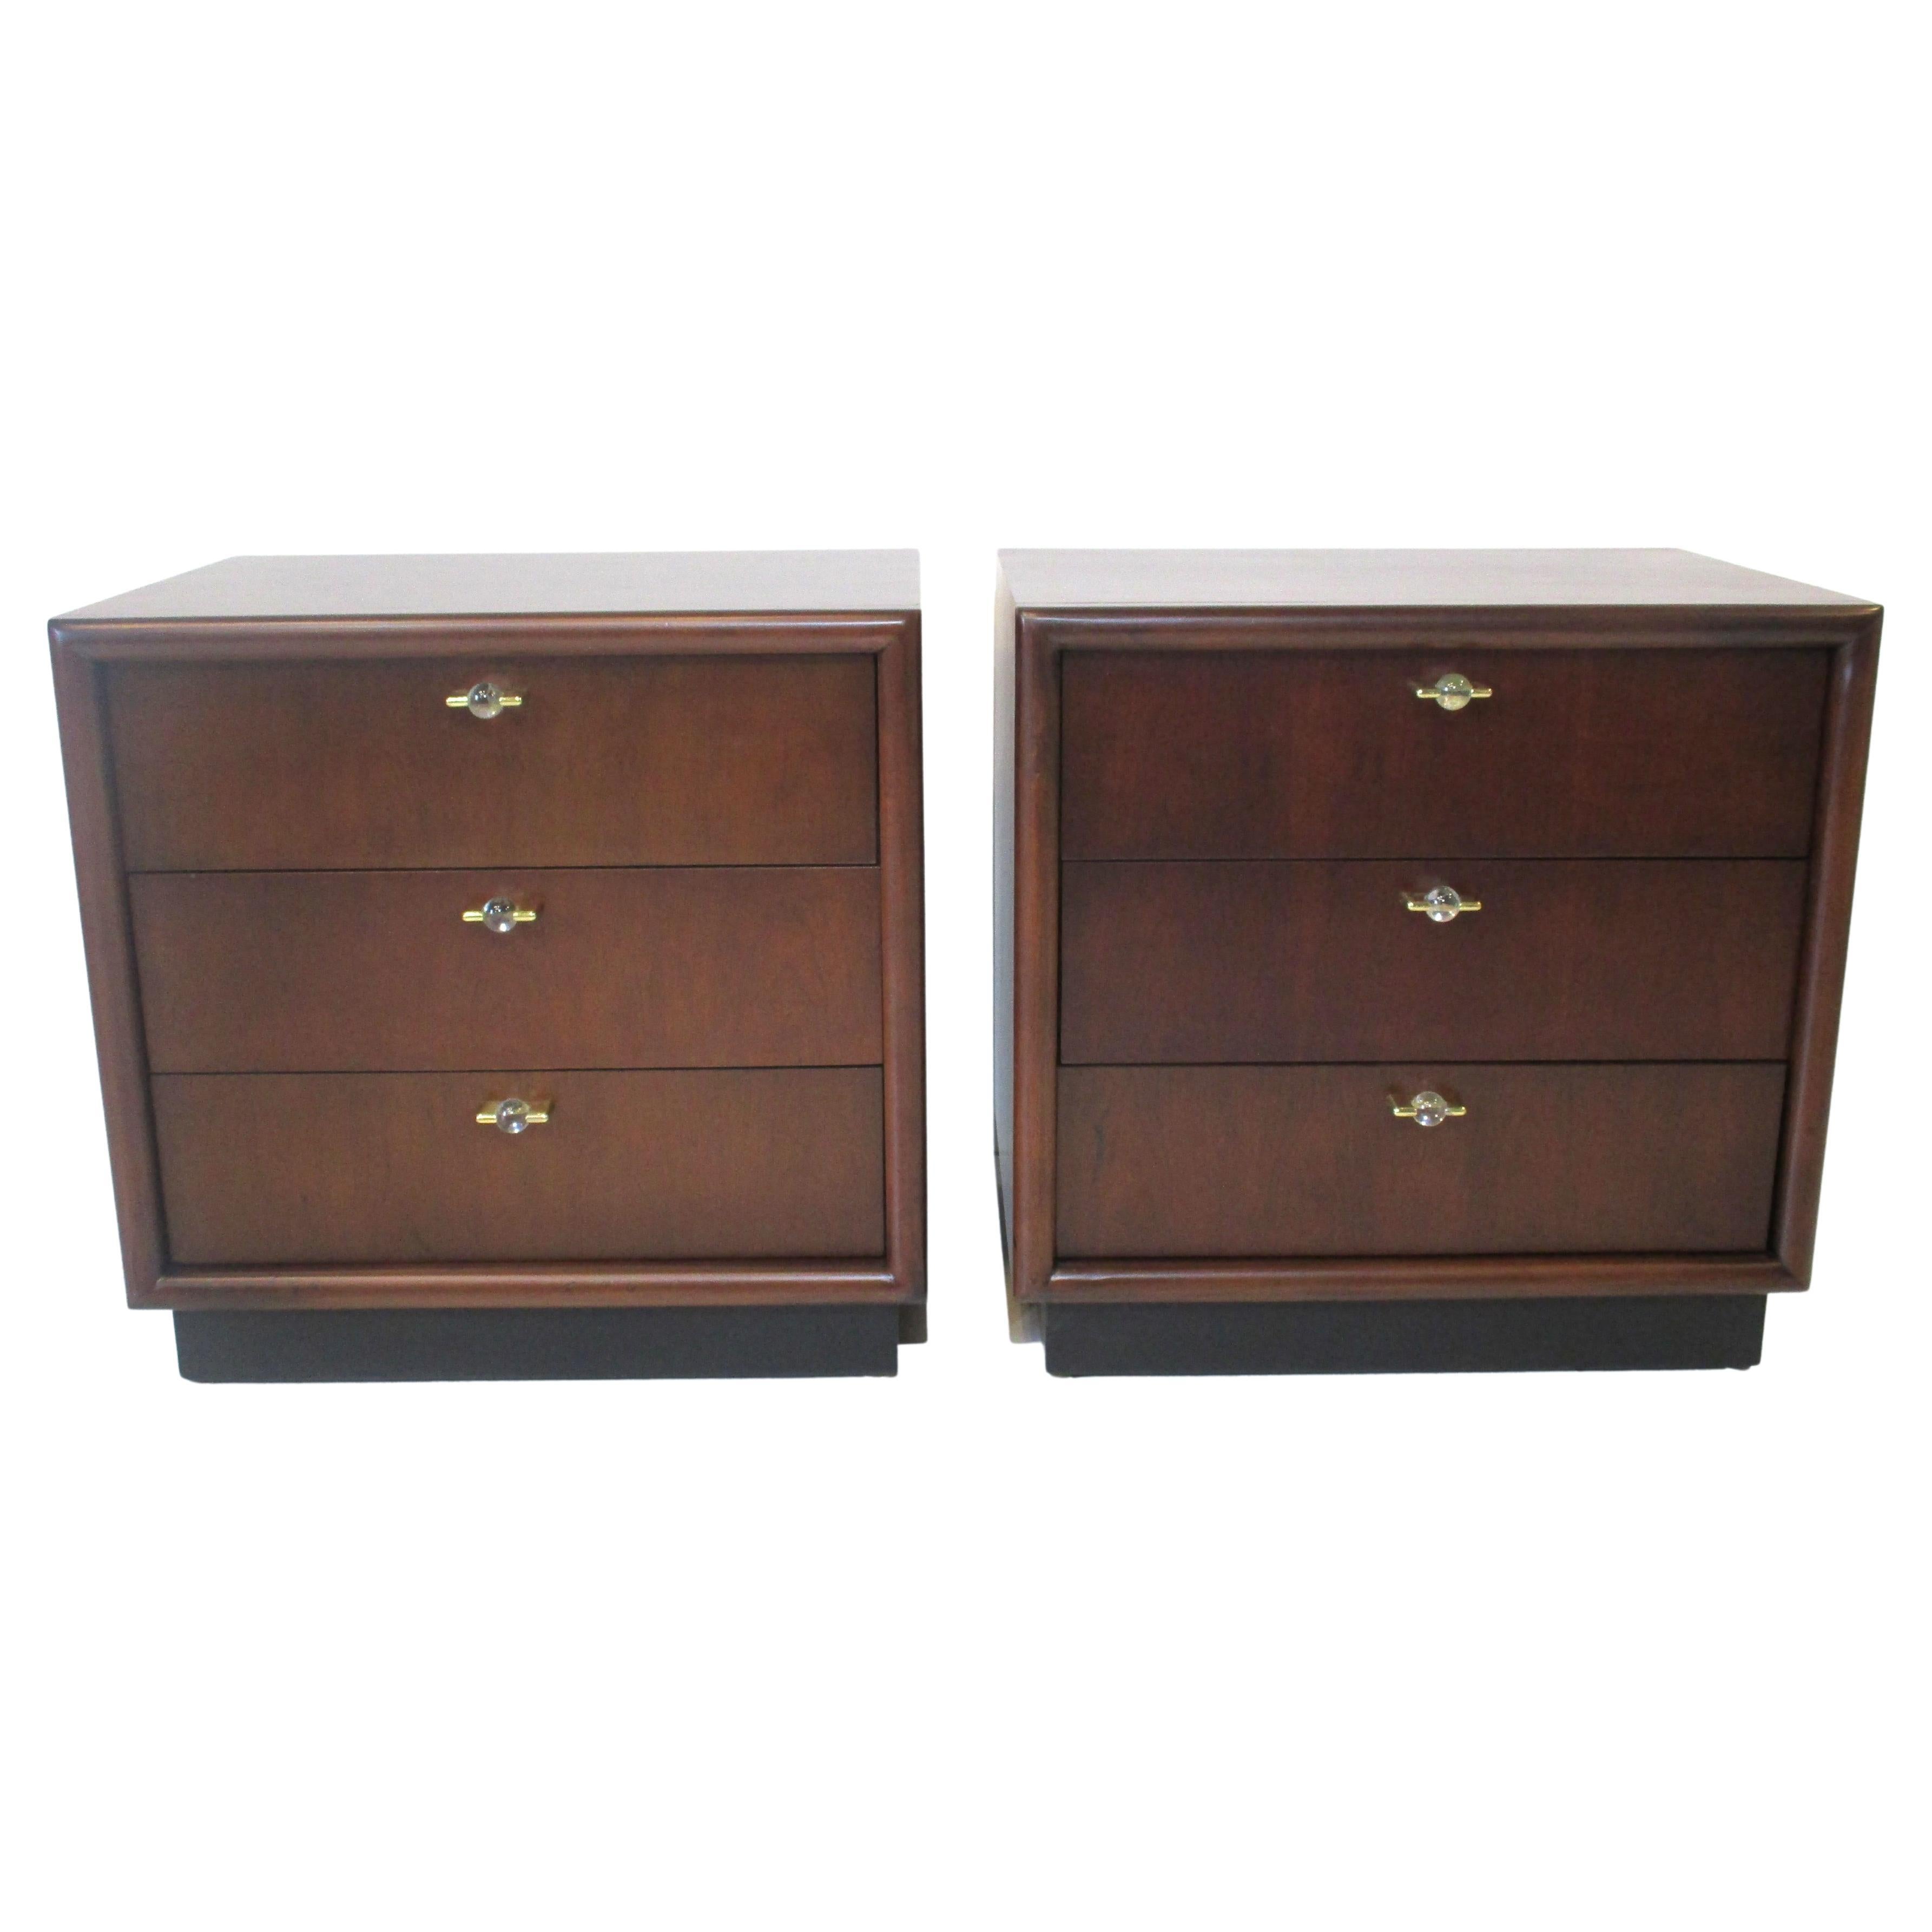 Mid-Century Nightstands in the Style of Dunbar by Romweber